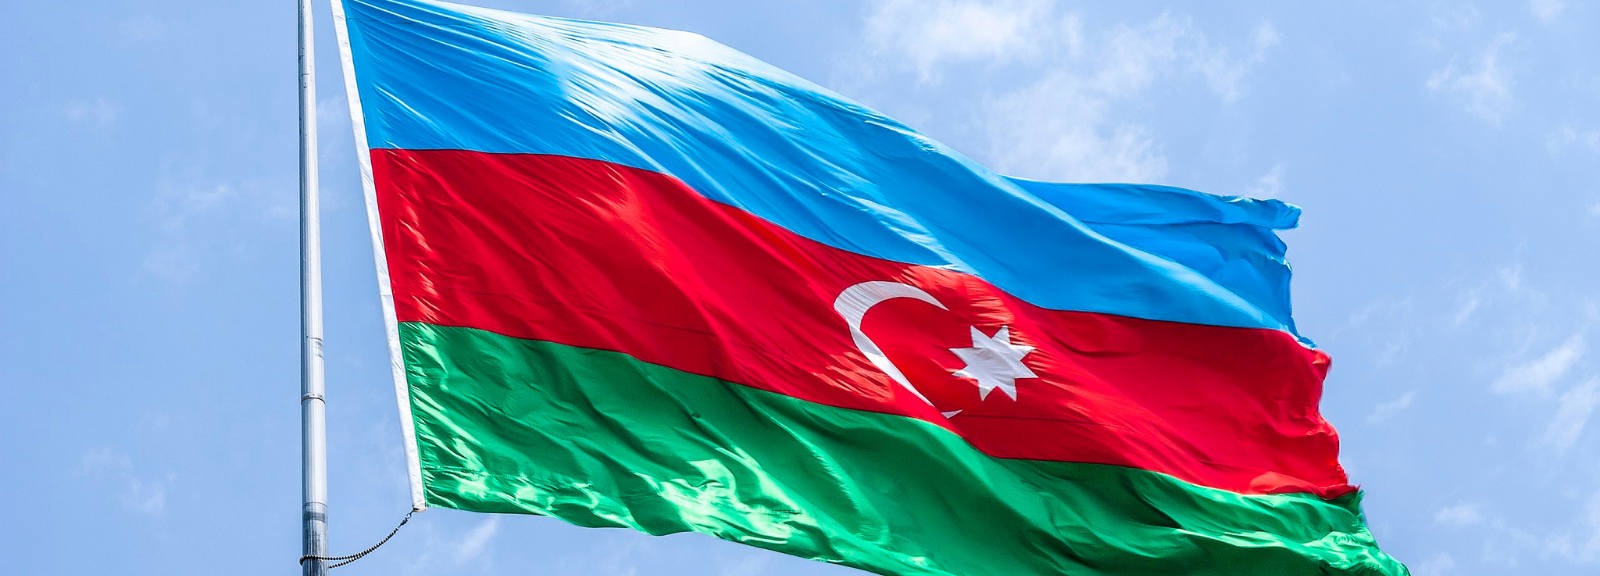 A picture of a flag pole with the Azerbaijan flag at the top, blowing in the wind.